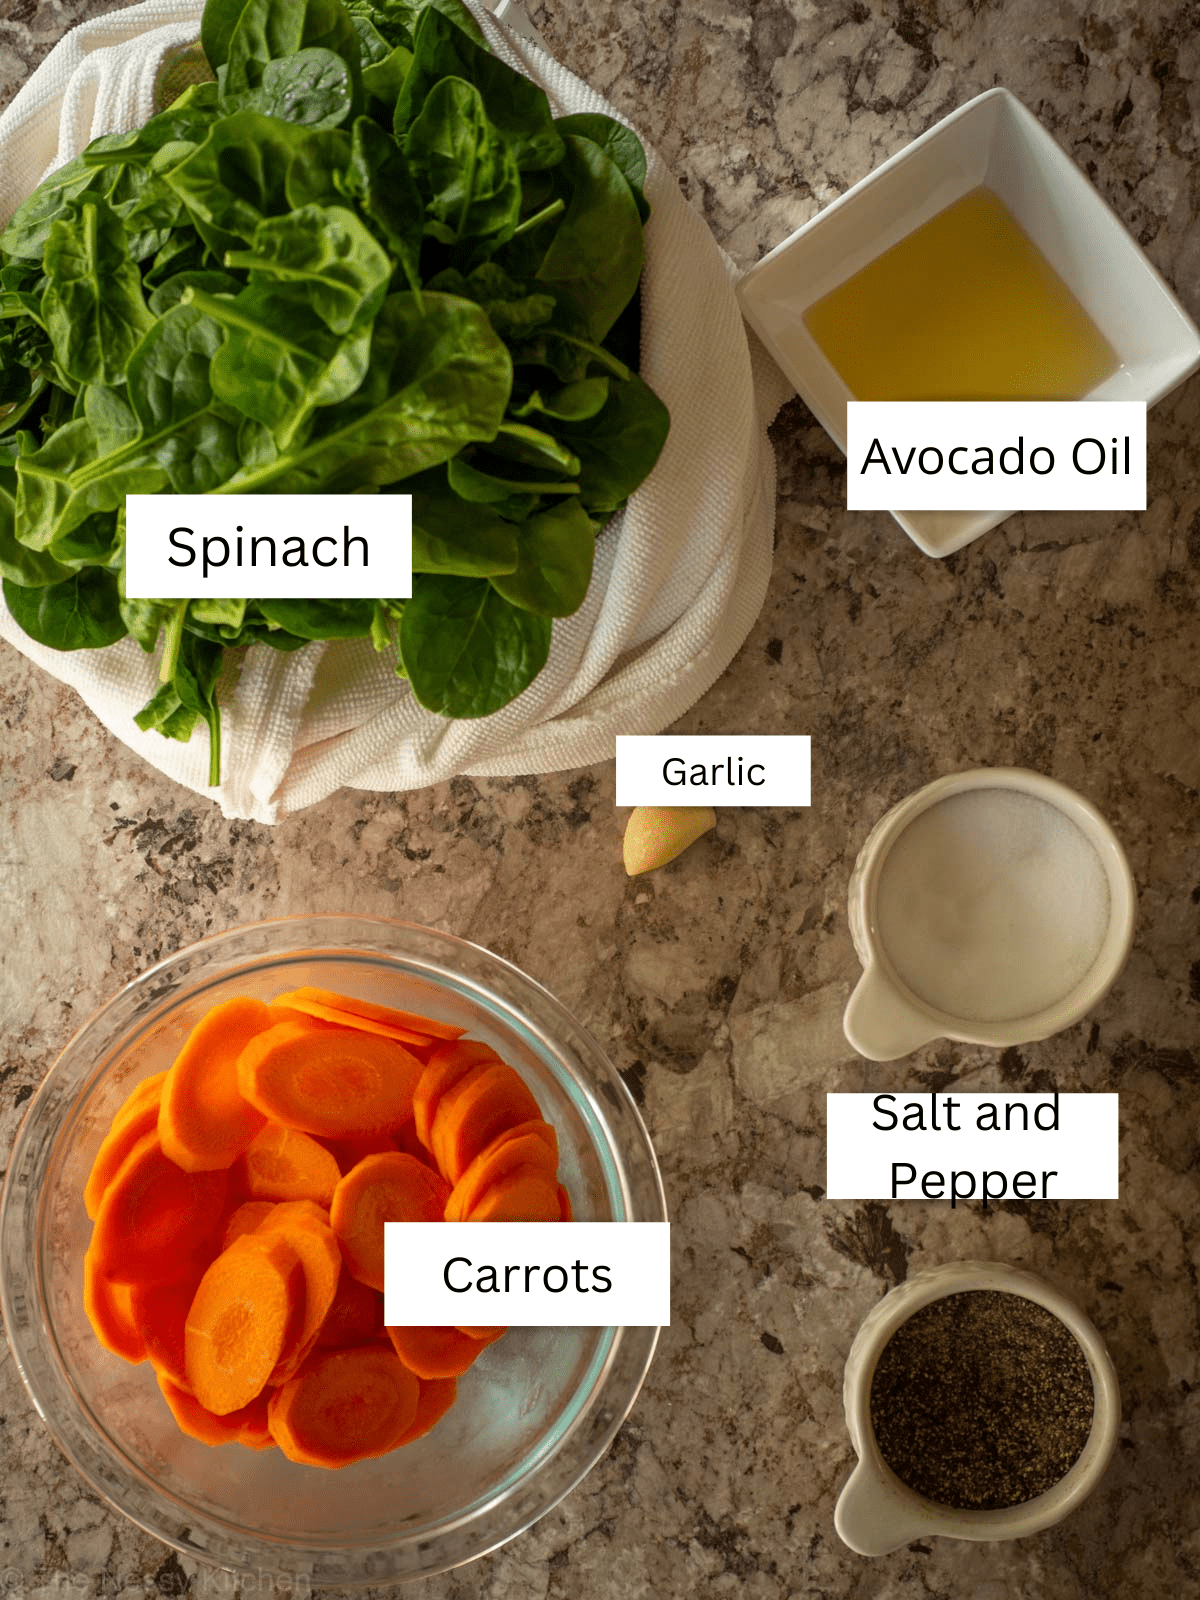 Ingredients for spinach and carrot recipe.